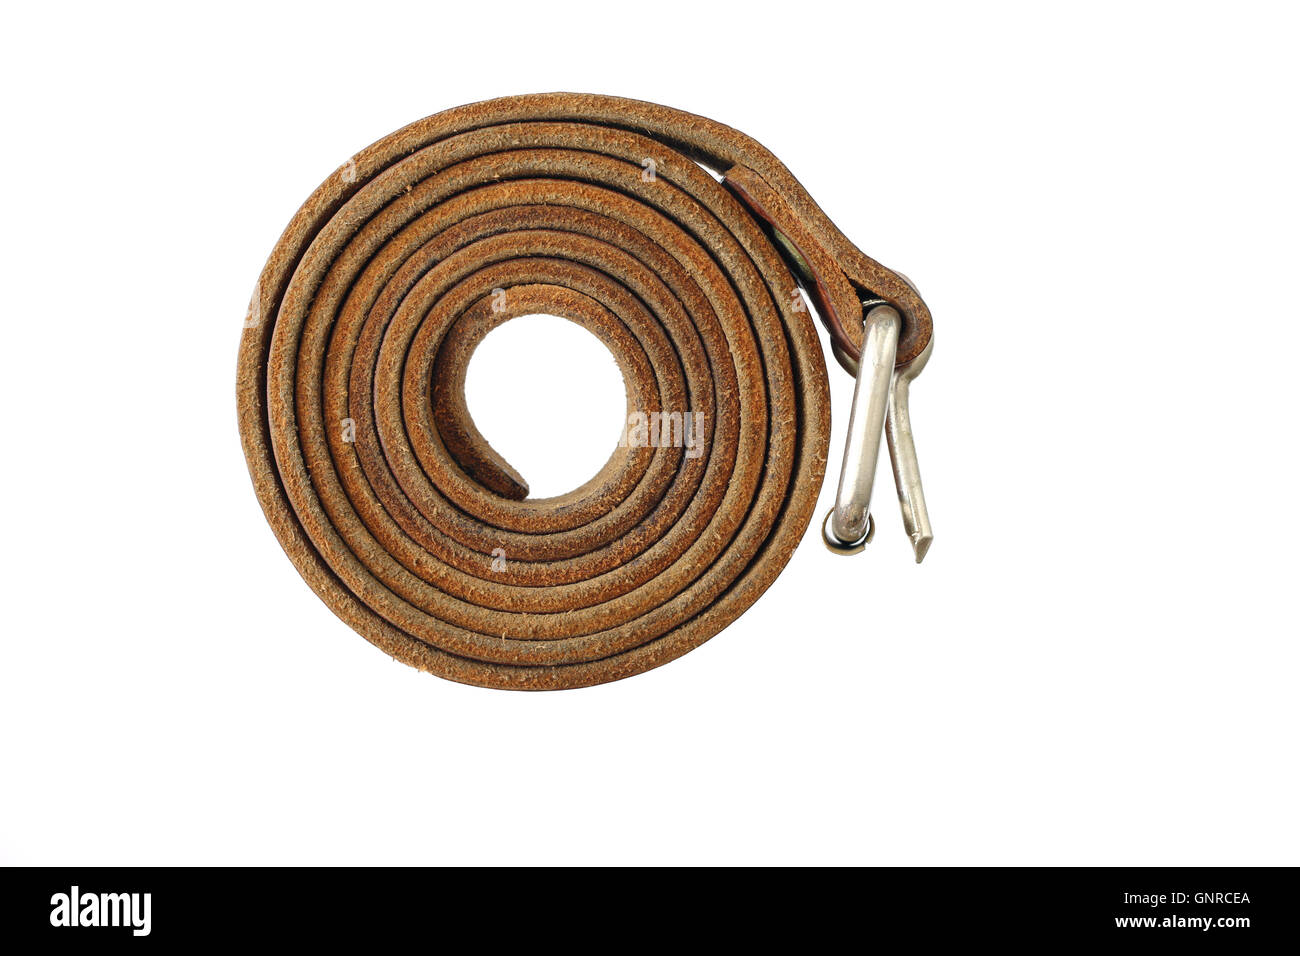 Coiled leather belt on a white background Stock Photo